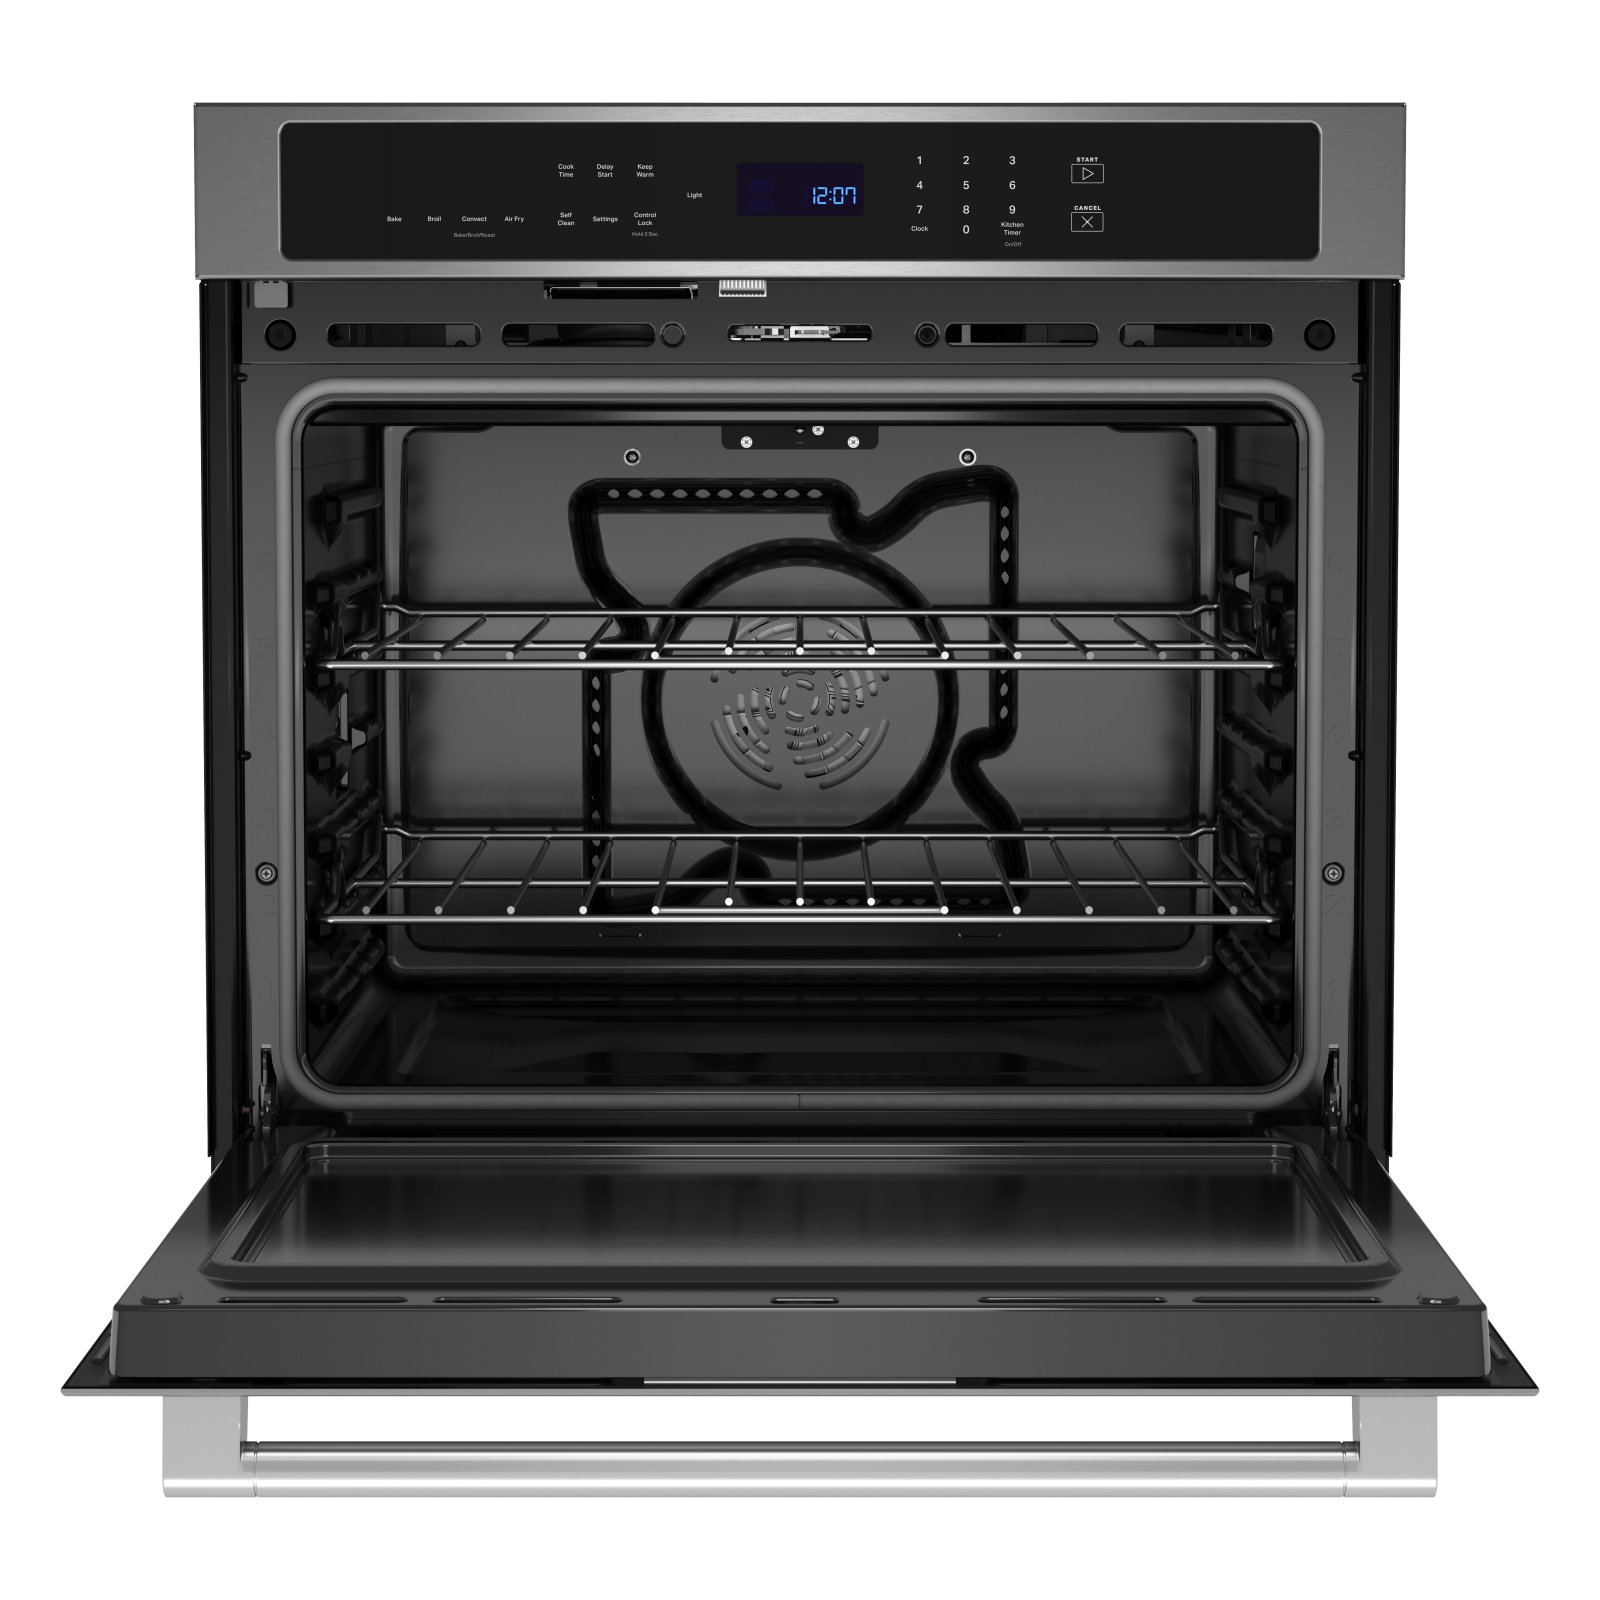 Maytag - 5 cu. ft Single Wall Oven in Stainless - MOES6030LZ